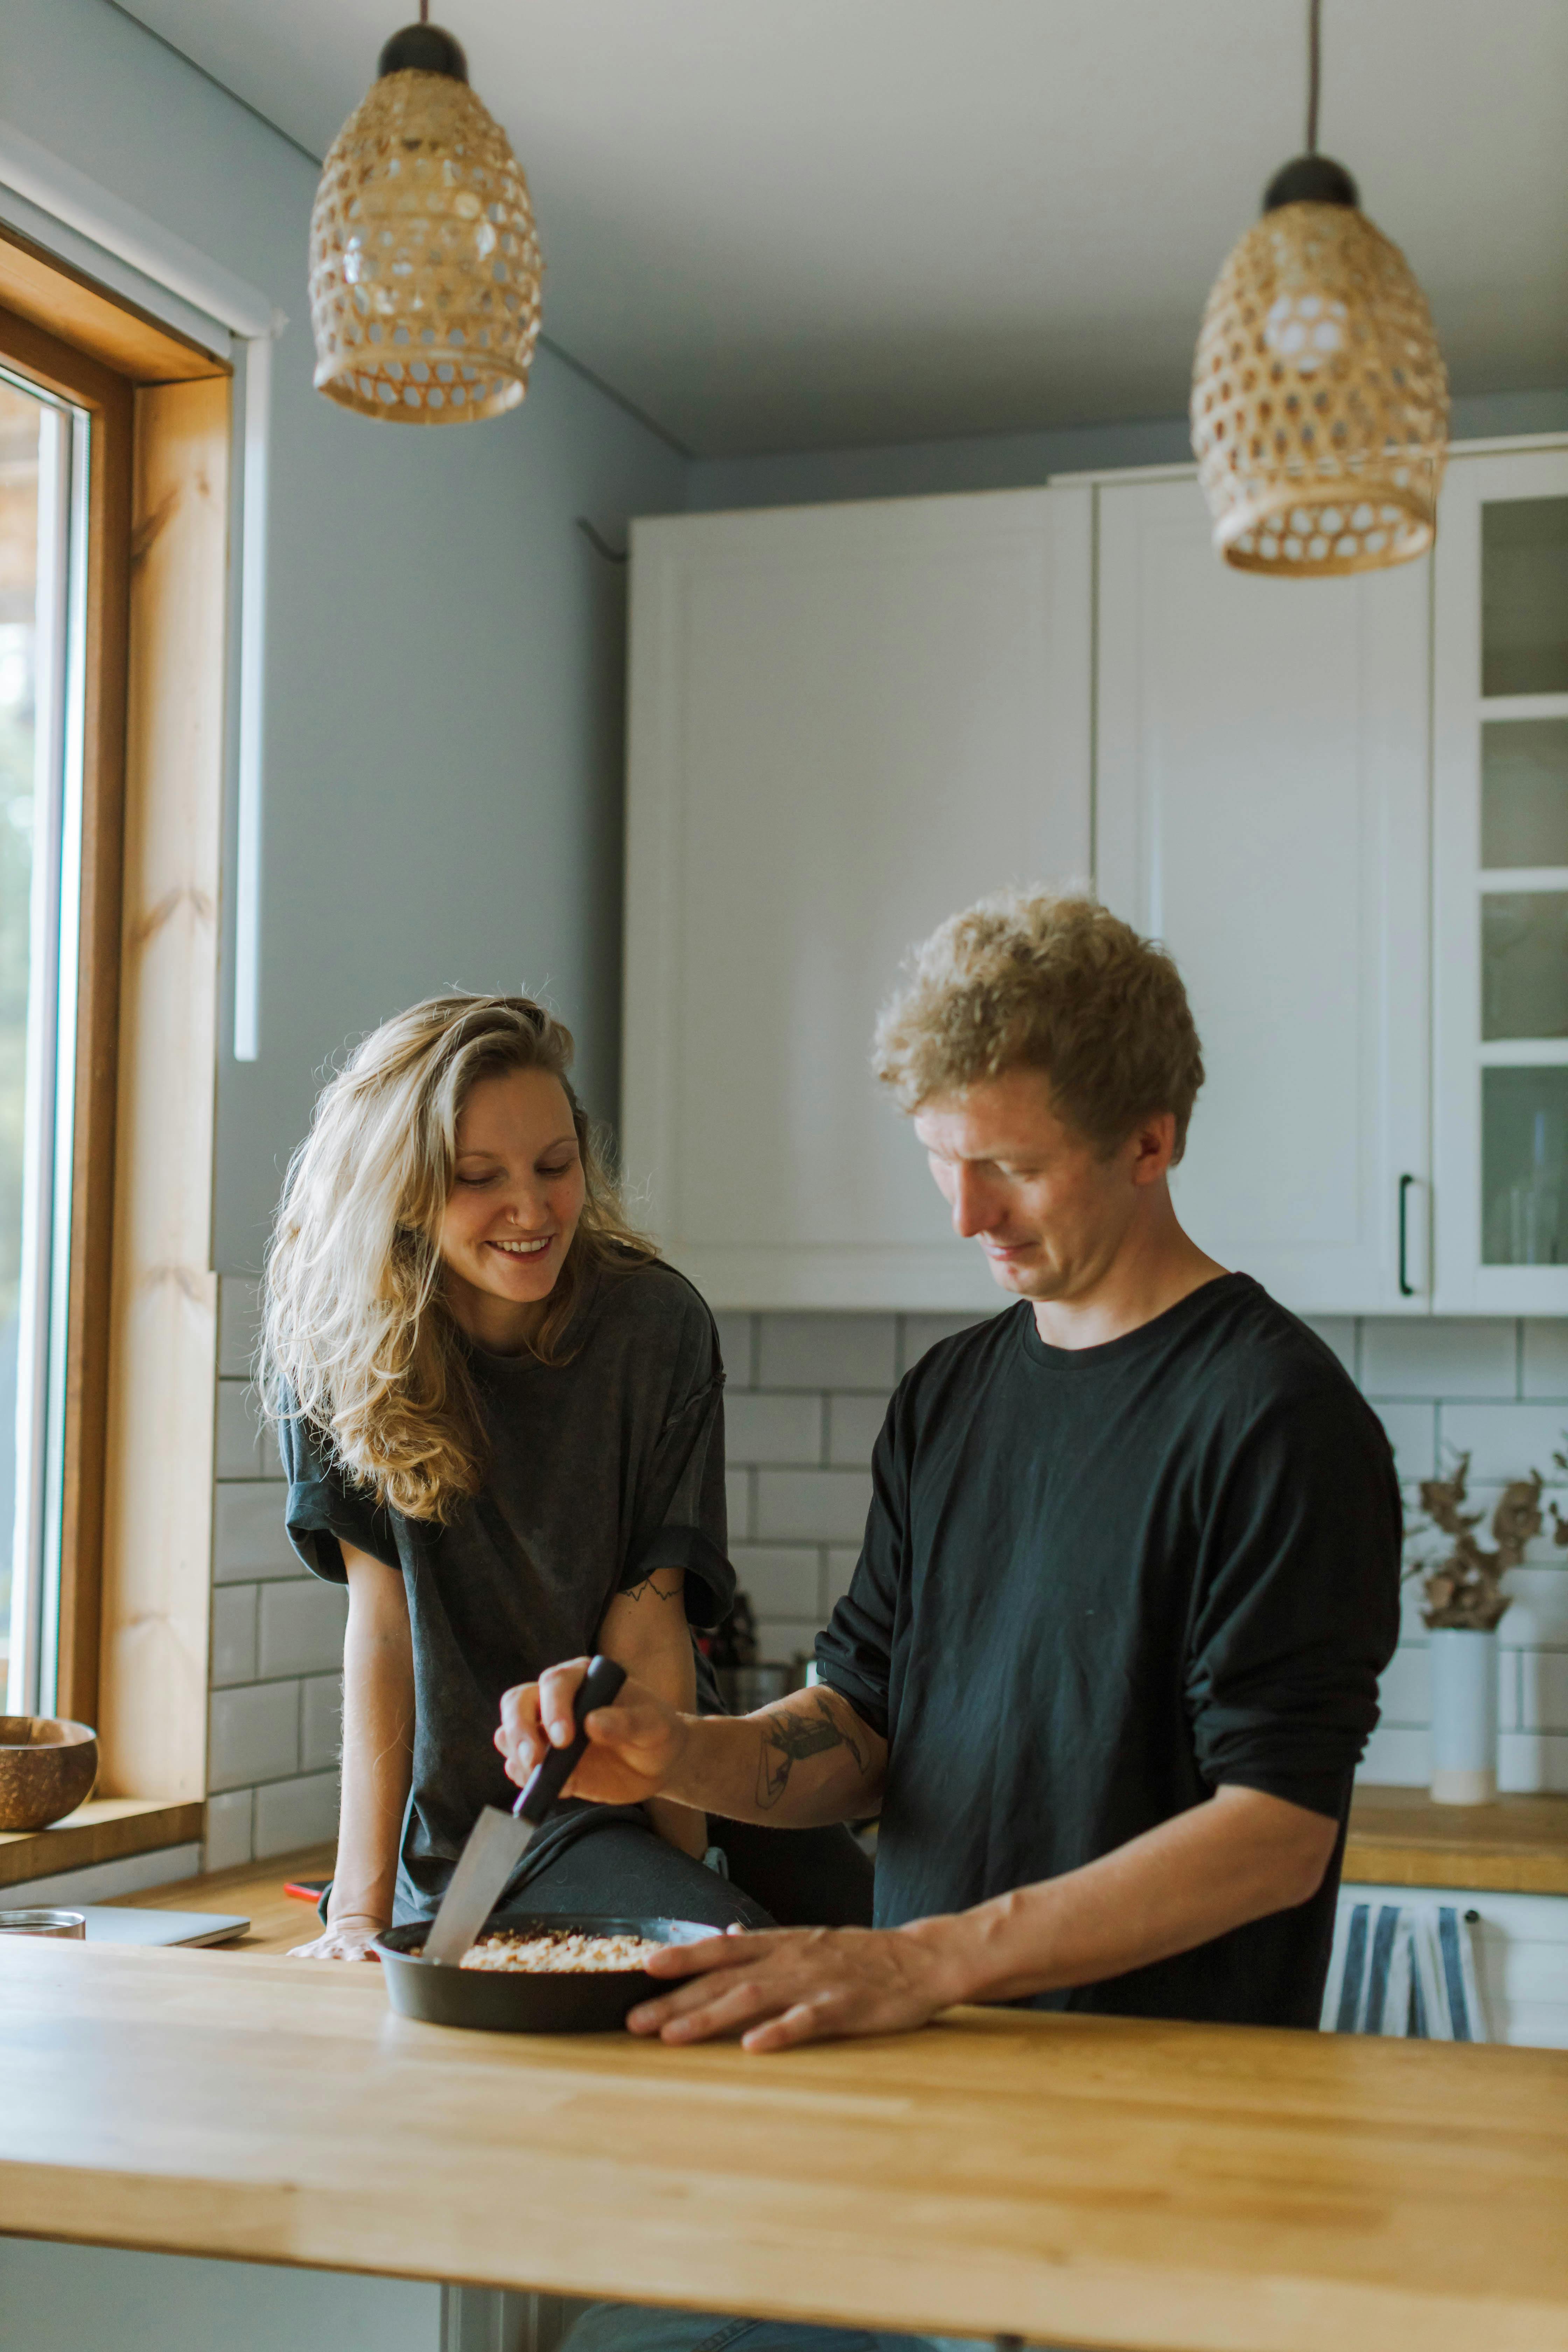 A man and woman cooking together in the kitchen | Source: Pexels